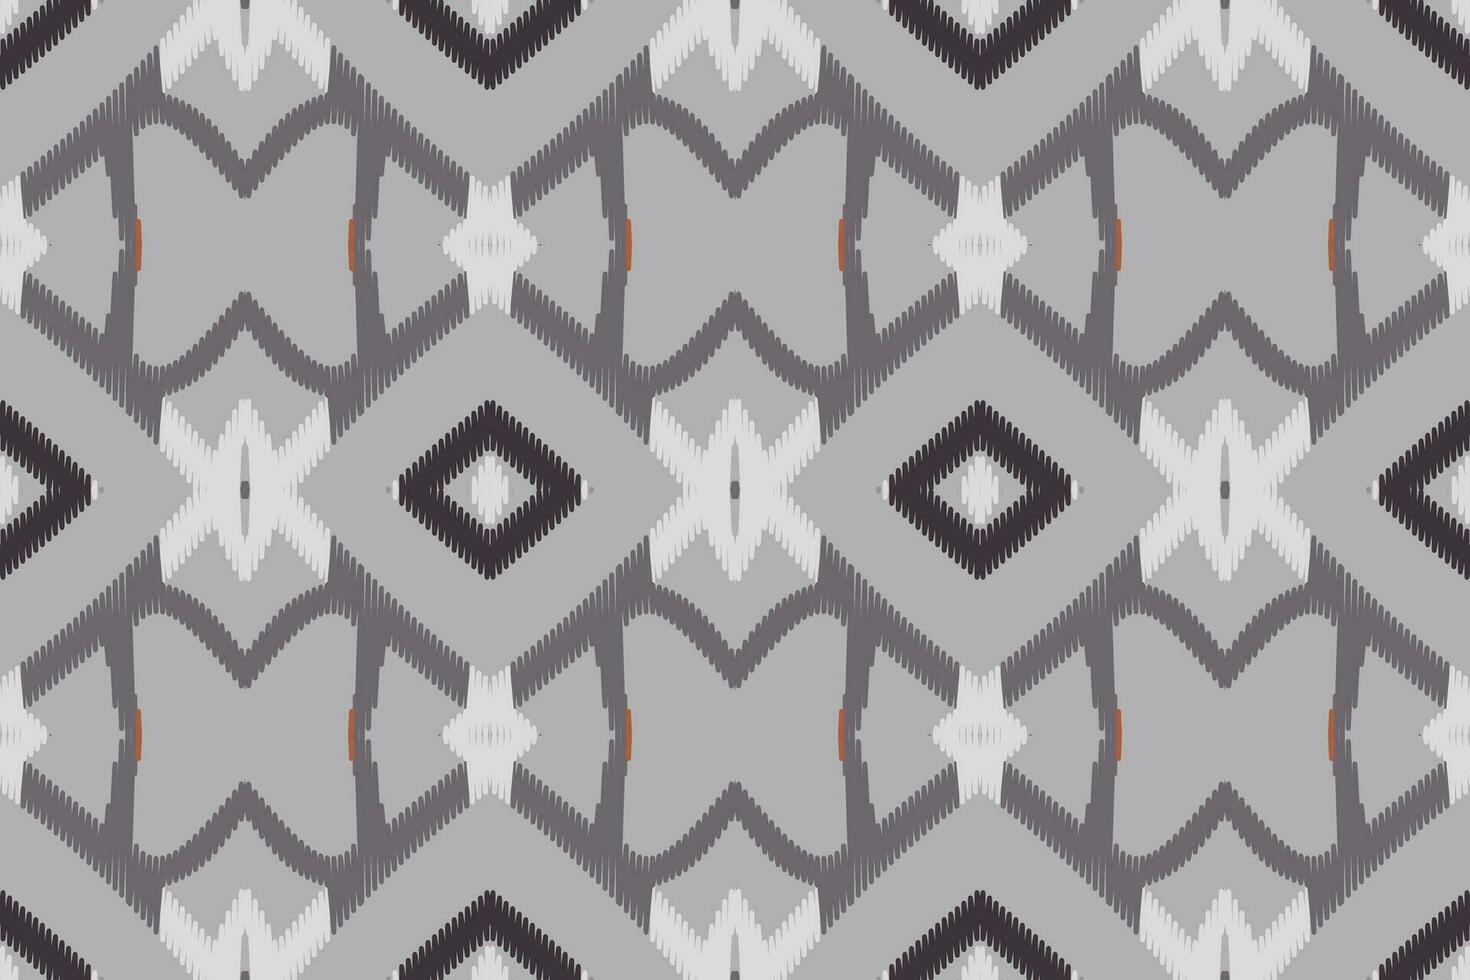 Ikat Seamless Pattern Embroidery Background. Ikat Frame Geometric Ethnic Oriental Pattern traditional.aztec Style Abstract Vector illustration.design for Texture,fabric,clothing,wrapping,sarong.